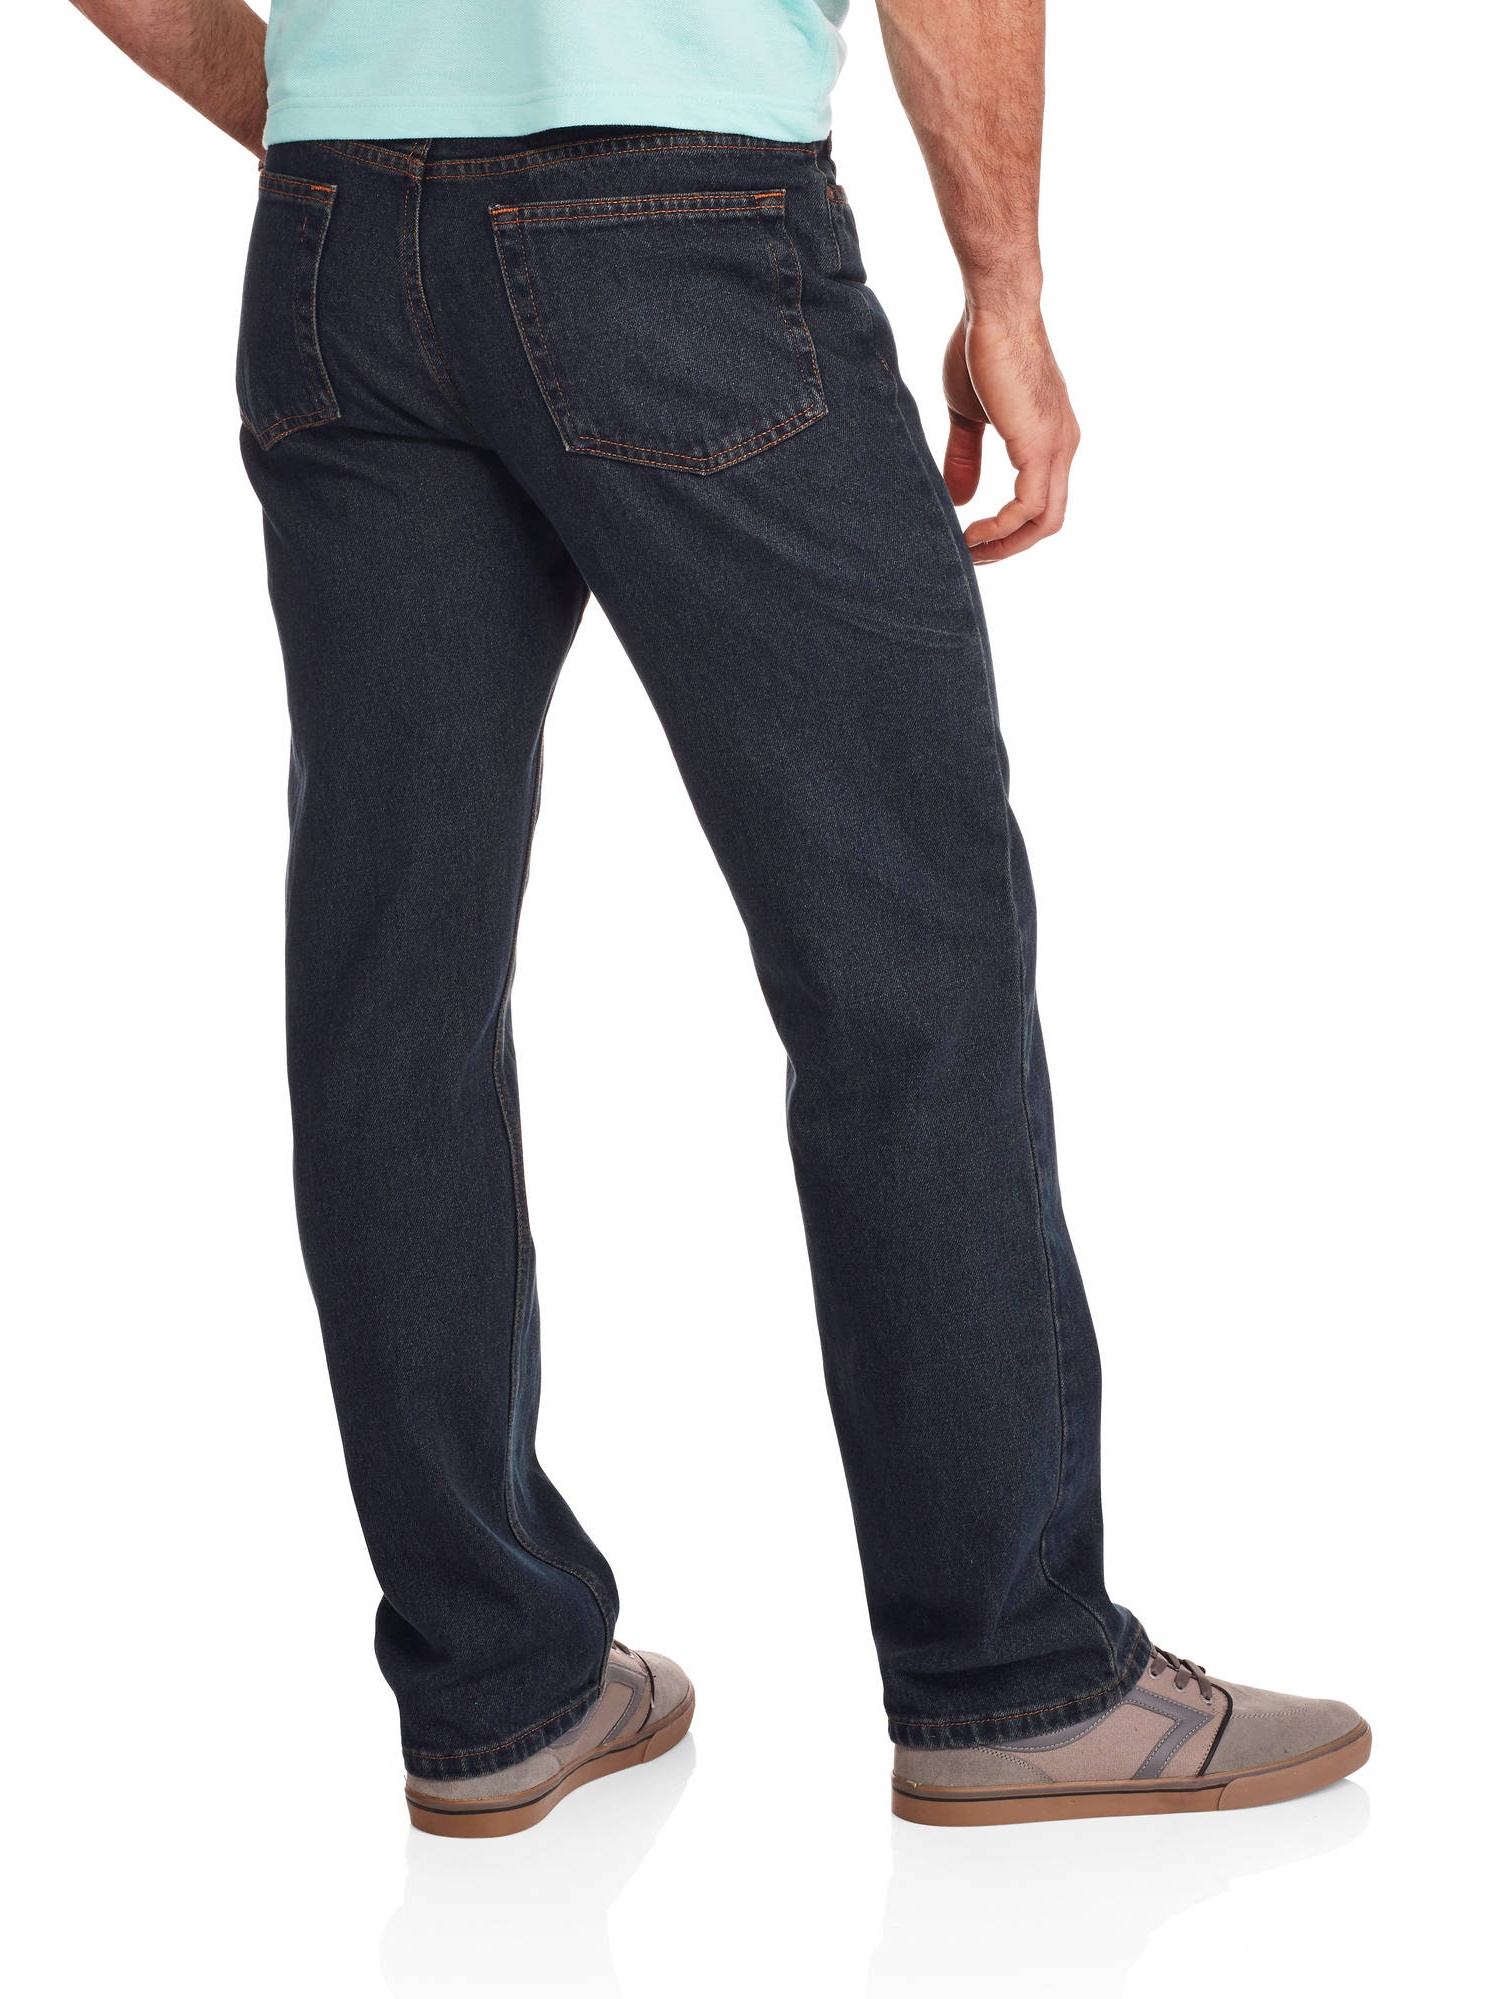 Men's Relaxed Fit Jeans - image 2 of 2